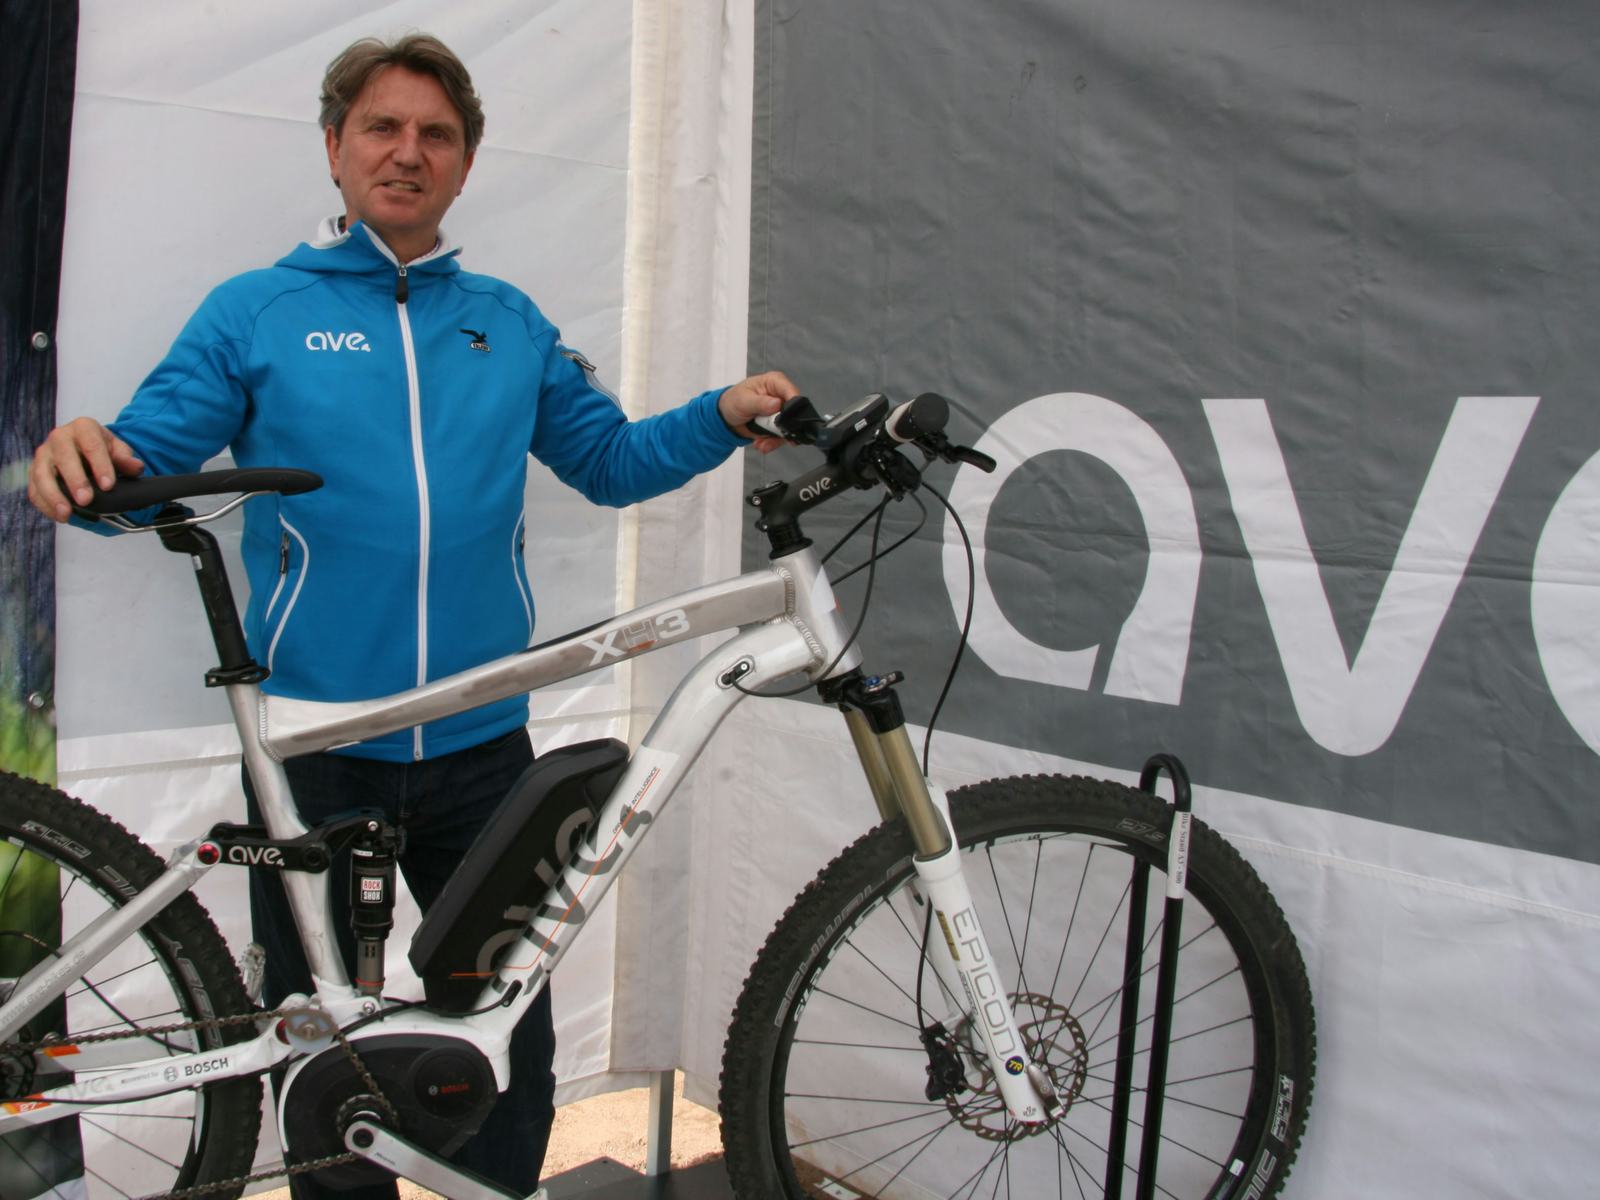 Pictured here is sales manager Berndt Stiller presenting a greatly expanded Ave e-bike range at Eurobike 2013. – Photo Jo Beckendorff